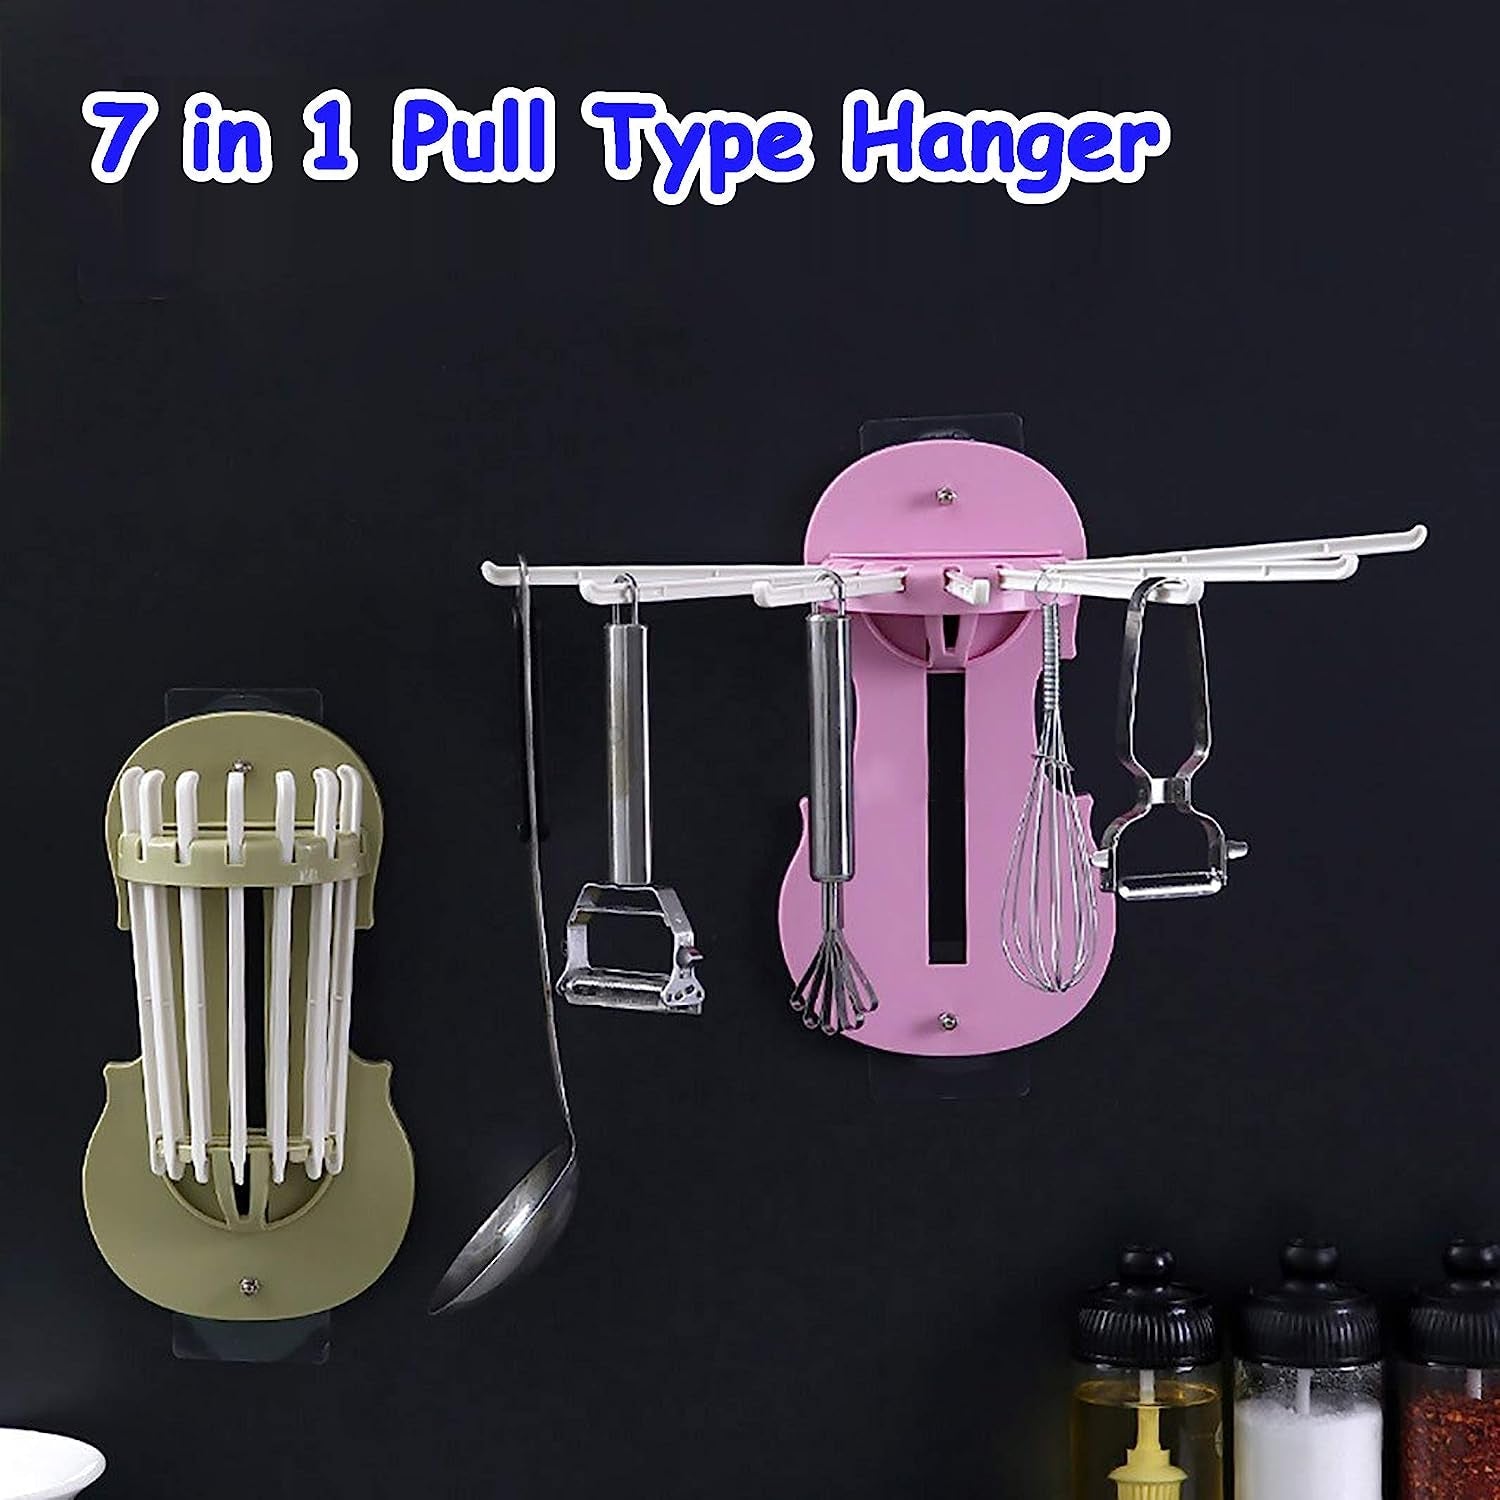 7728 Plastic 7-in-1 Multifunction Retractable Wall-Mounted Pull-Out Hanger Rack Without Punching Hooks Up for Kitchen Bathroom